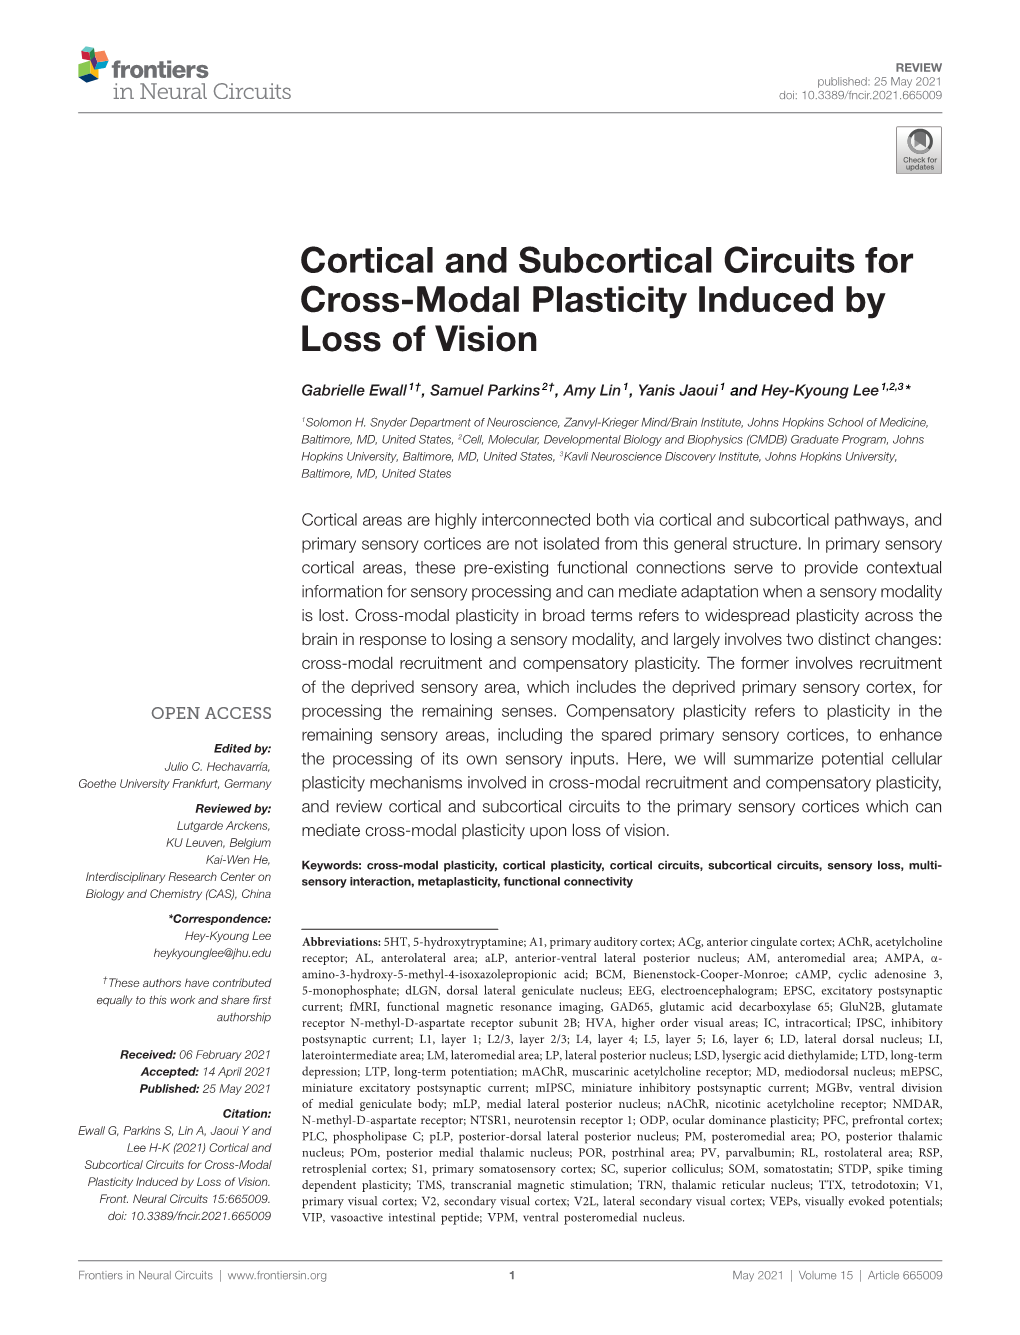 Cortical and Subcortical Circuits for Cross-Modal Plasticity Induced by Loss of Vision